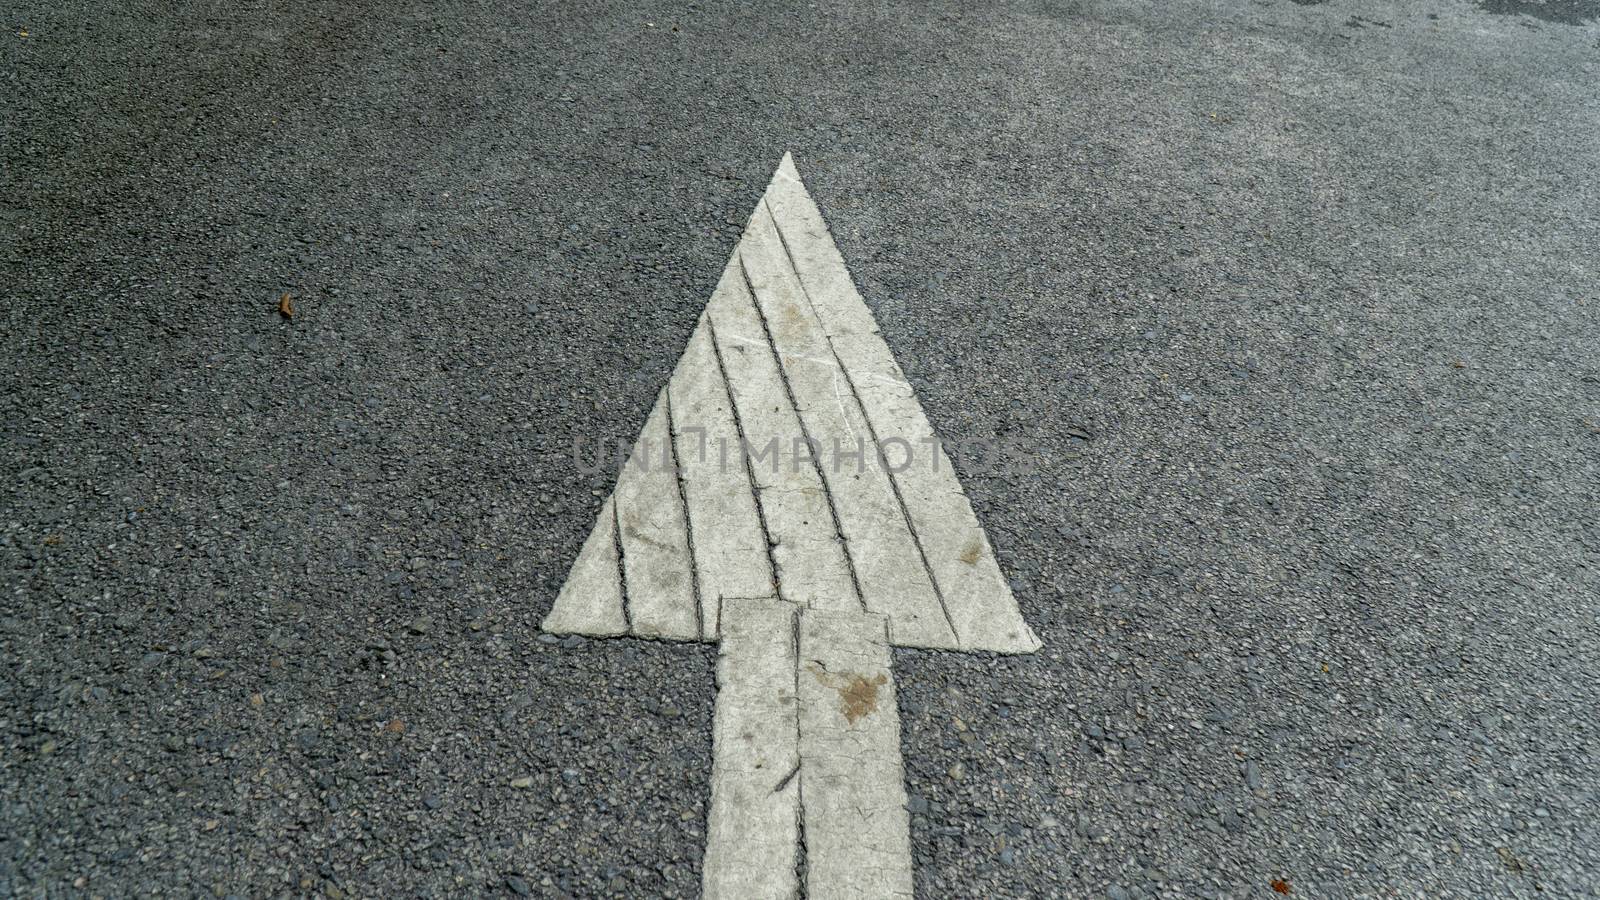 A white arrow painted sign on a gray paved road pointing the direction the car was supposed to drive. by sonandonures